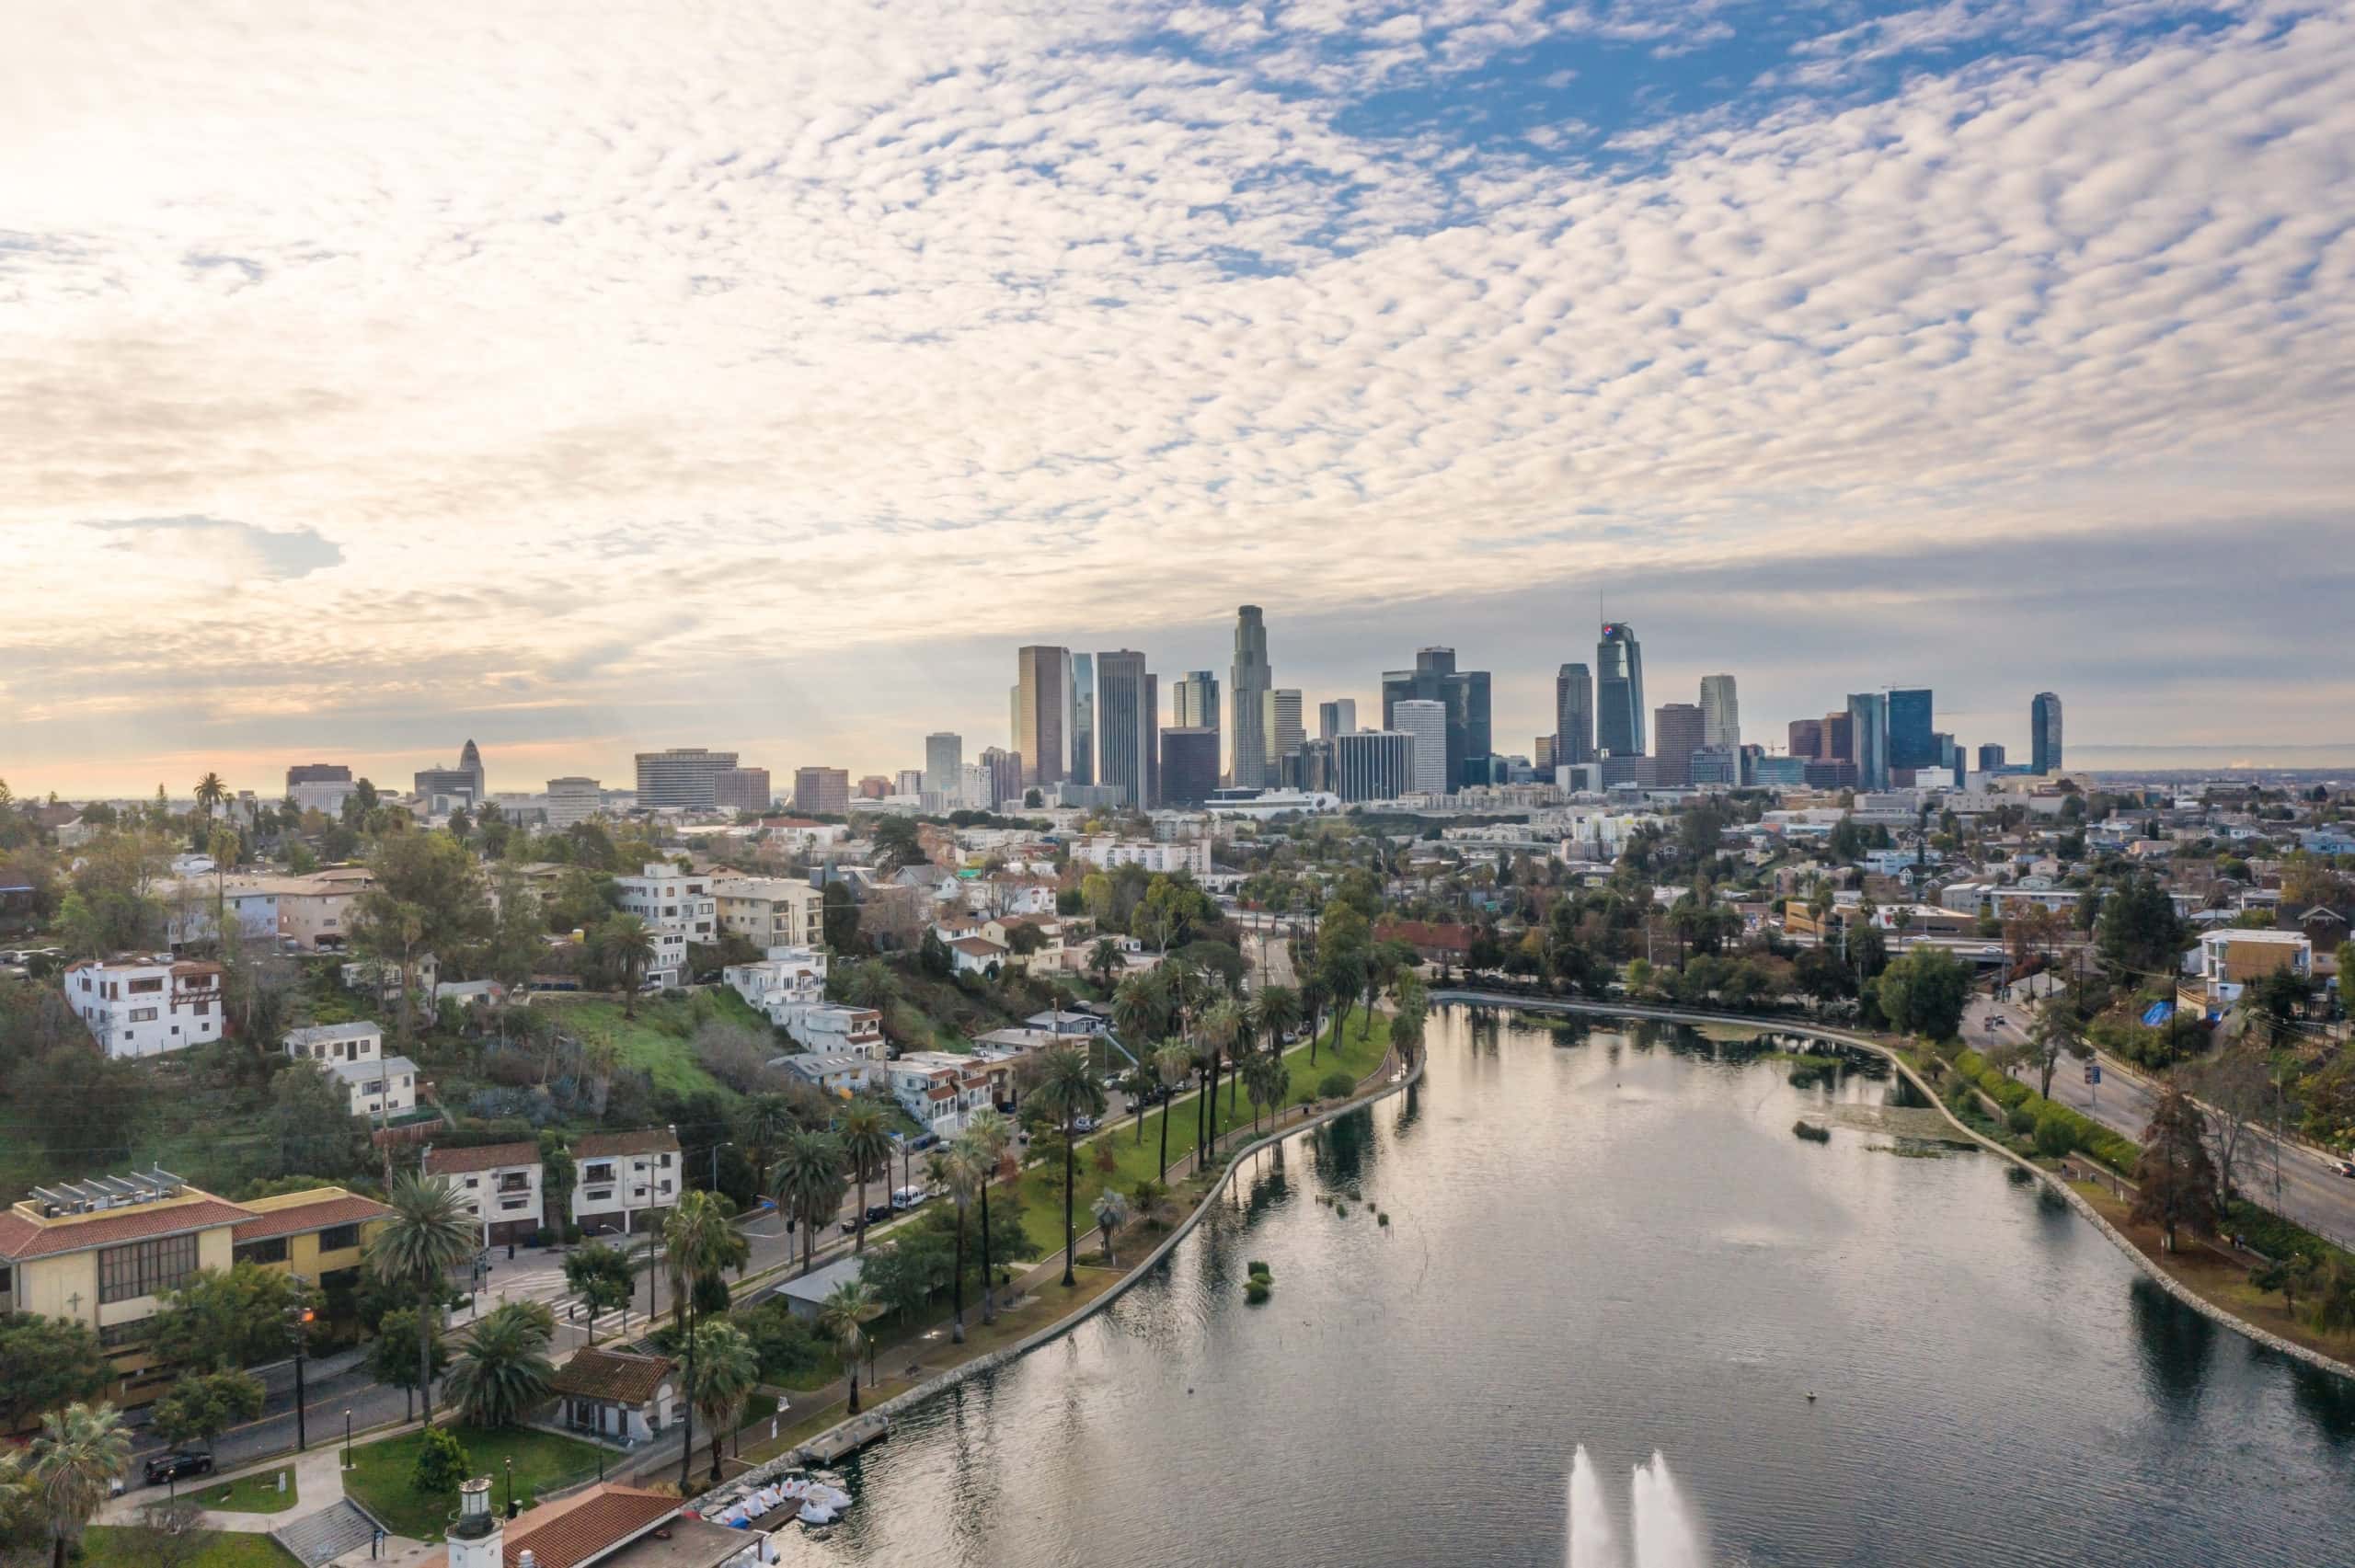 <p>If you're one of those people who likes to rent an AirBNB and pretend you live in a city for a few days, look no further than Silver Lake. Probably best-known as LA's <strong>biggest "hipster" neighborhood</strong>, you'll never have to travel far to find a delivious cup of coffee, a vegan cafe, or a cozy dive bar.</p><p>Plus, its location means adventures into Downtown, Hollywood, and Griffith Park will be a snap.</p>